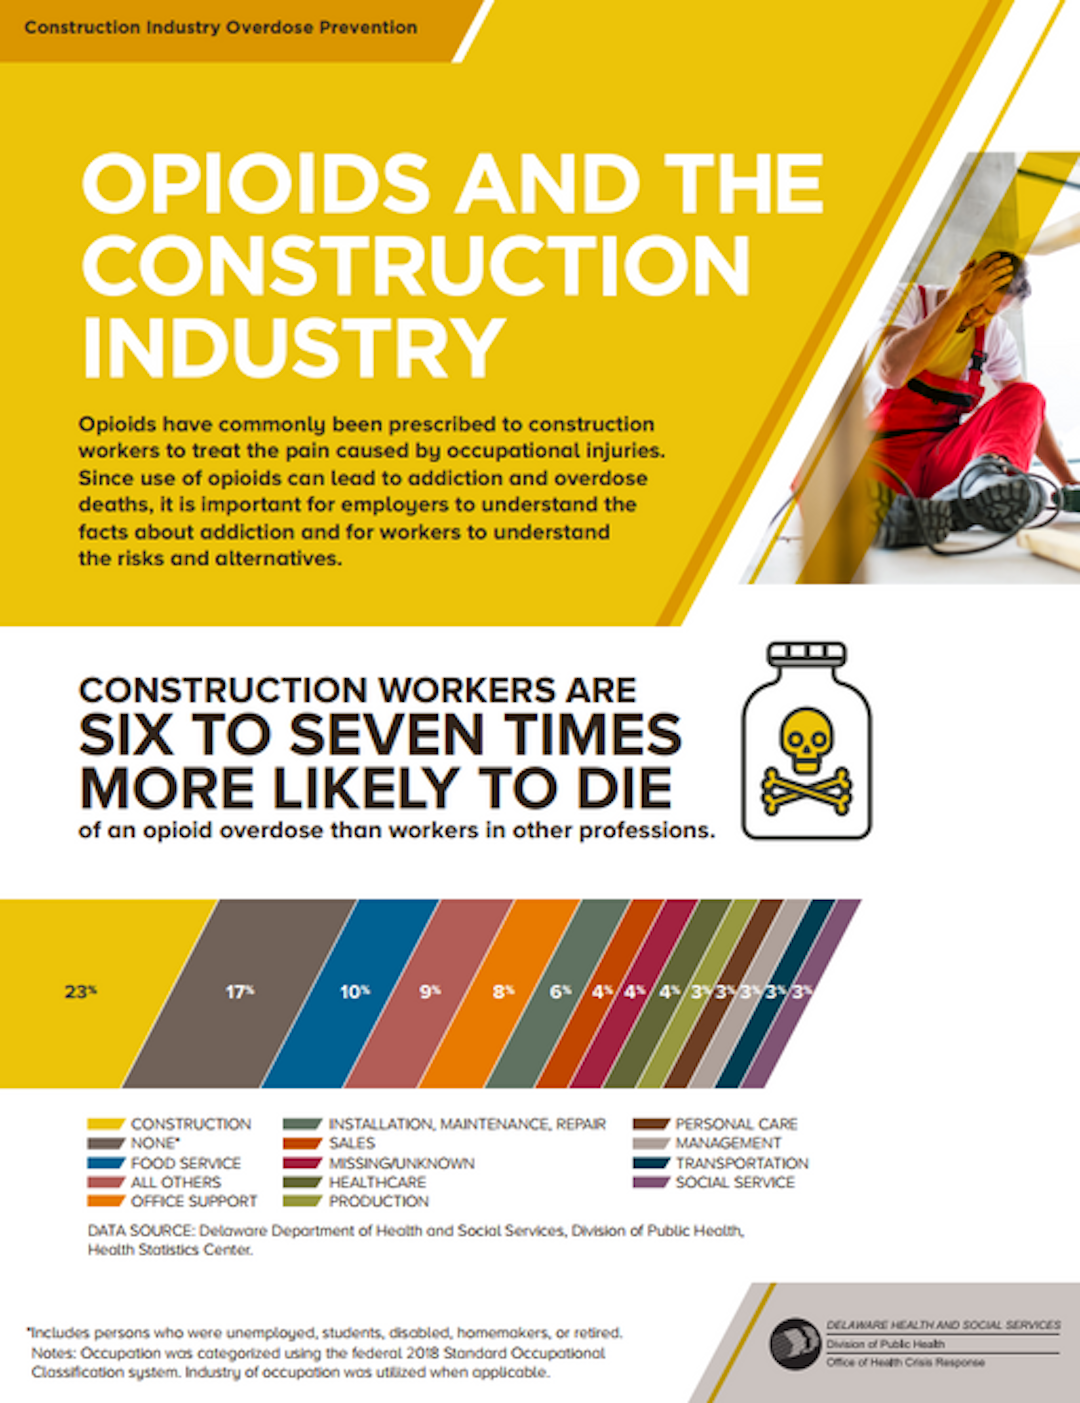 Opioids and the Construction Industry